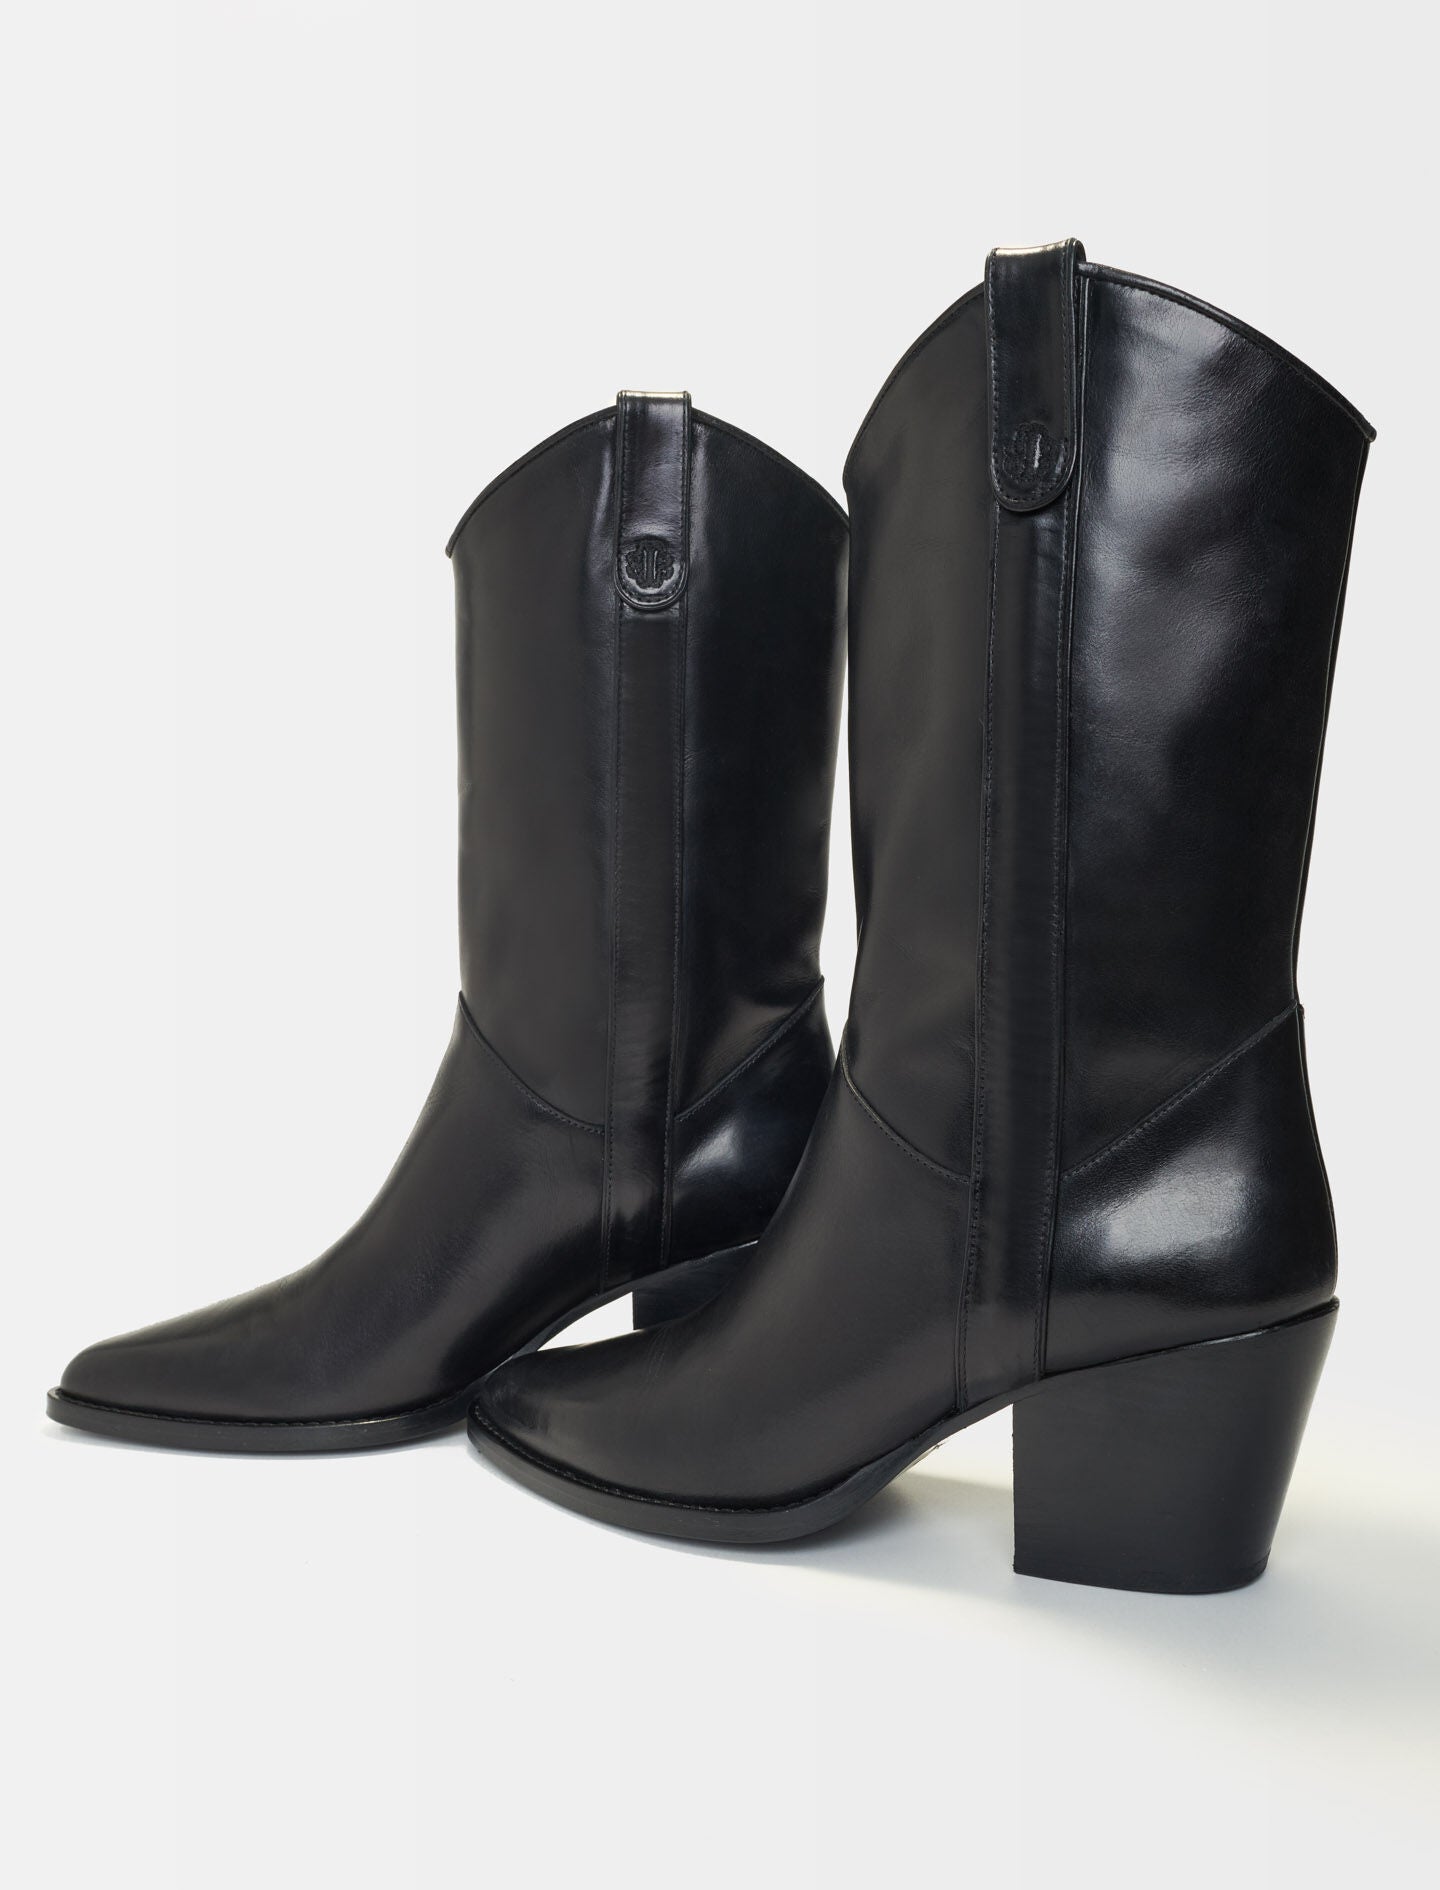 Black featured Heeled leather boots